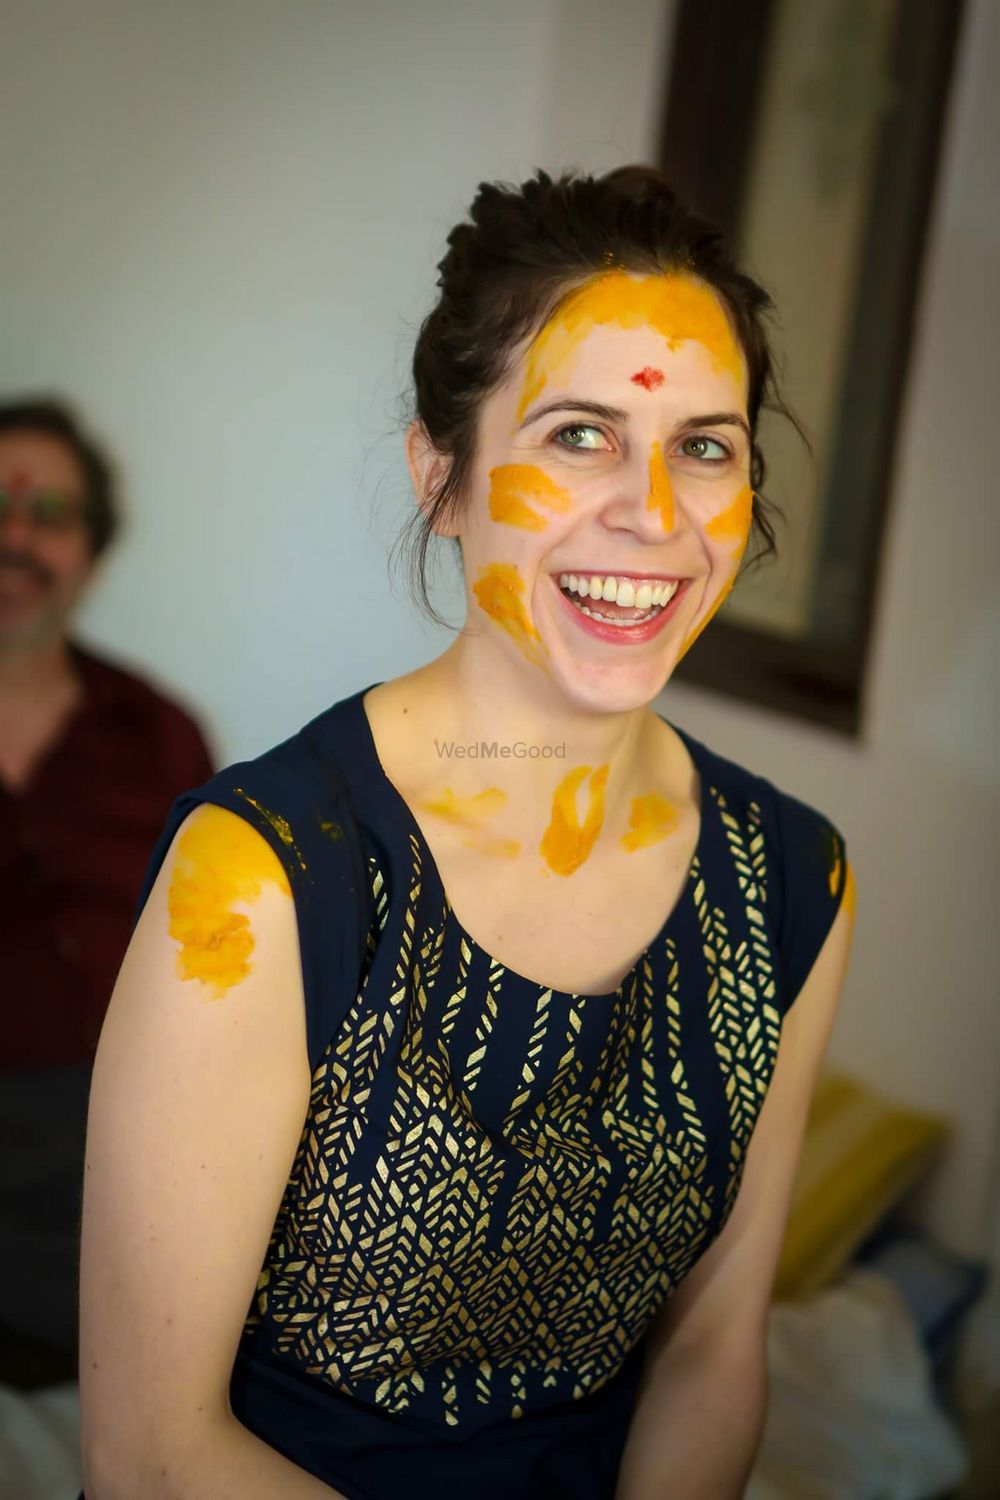 Photo From Haldi - Mehndi - By Sheer Hitch